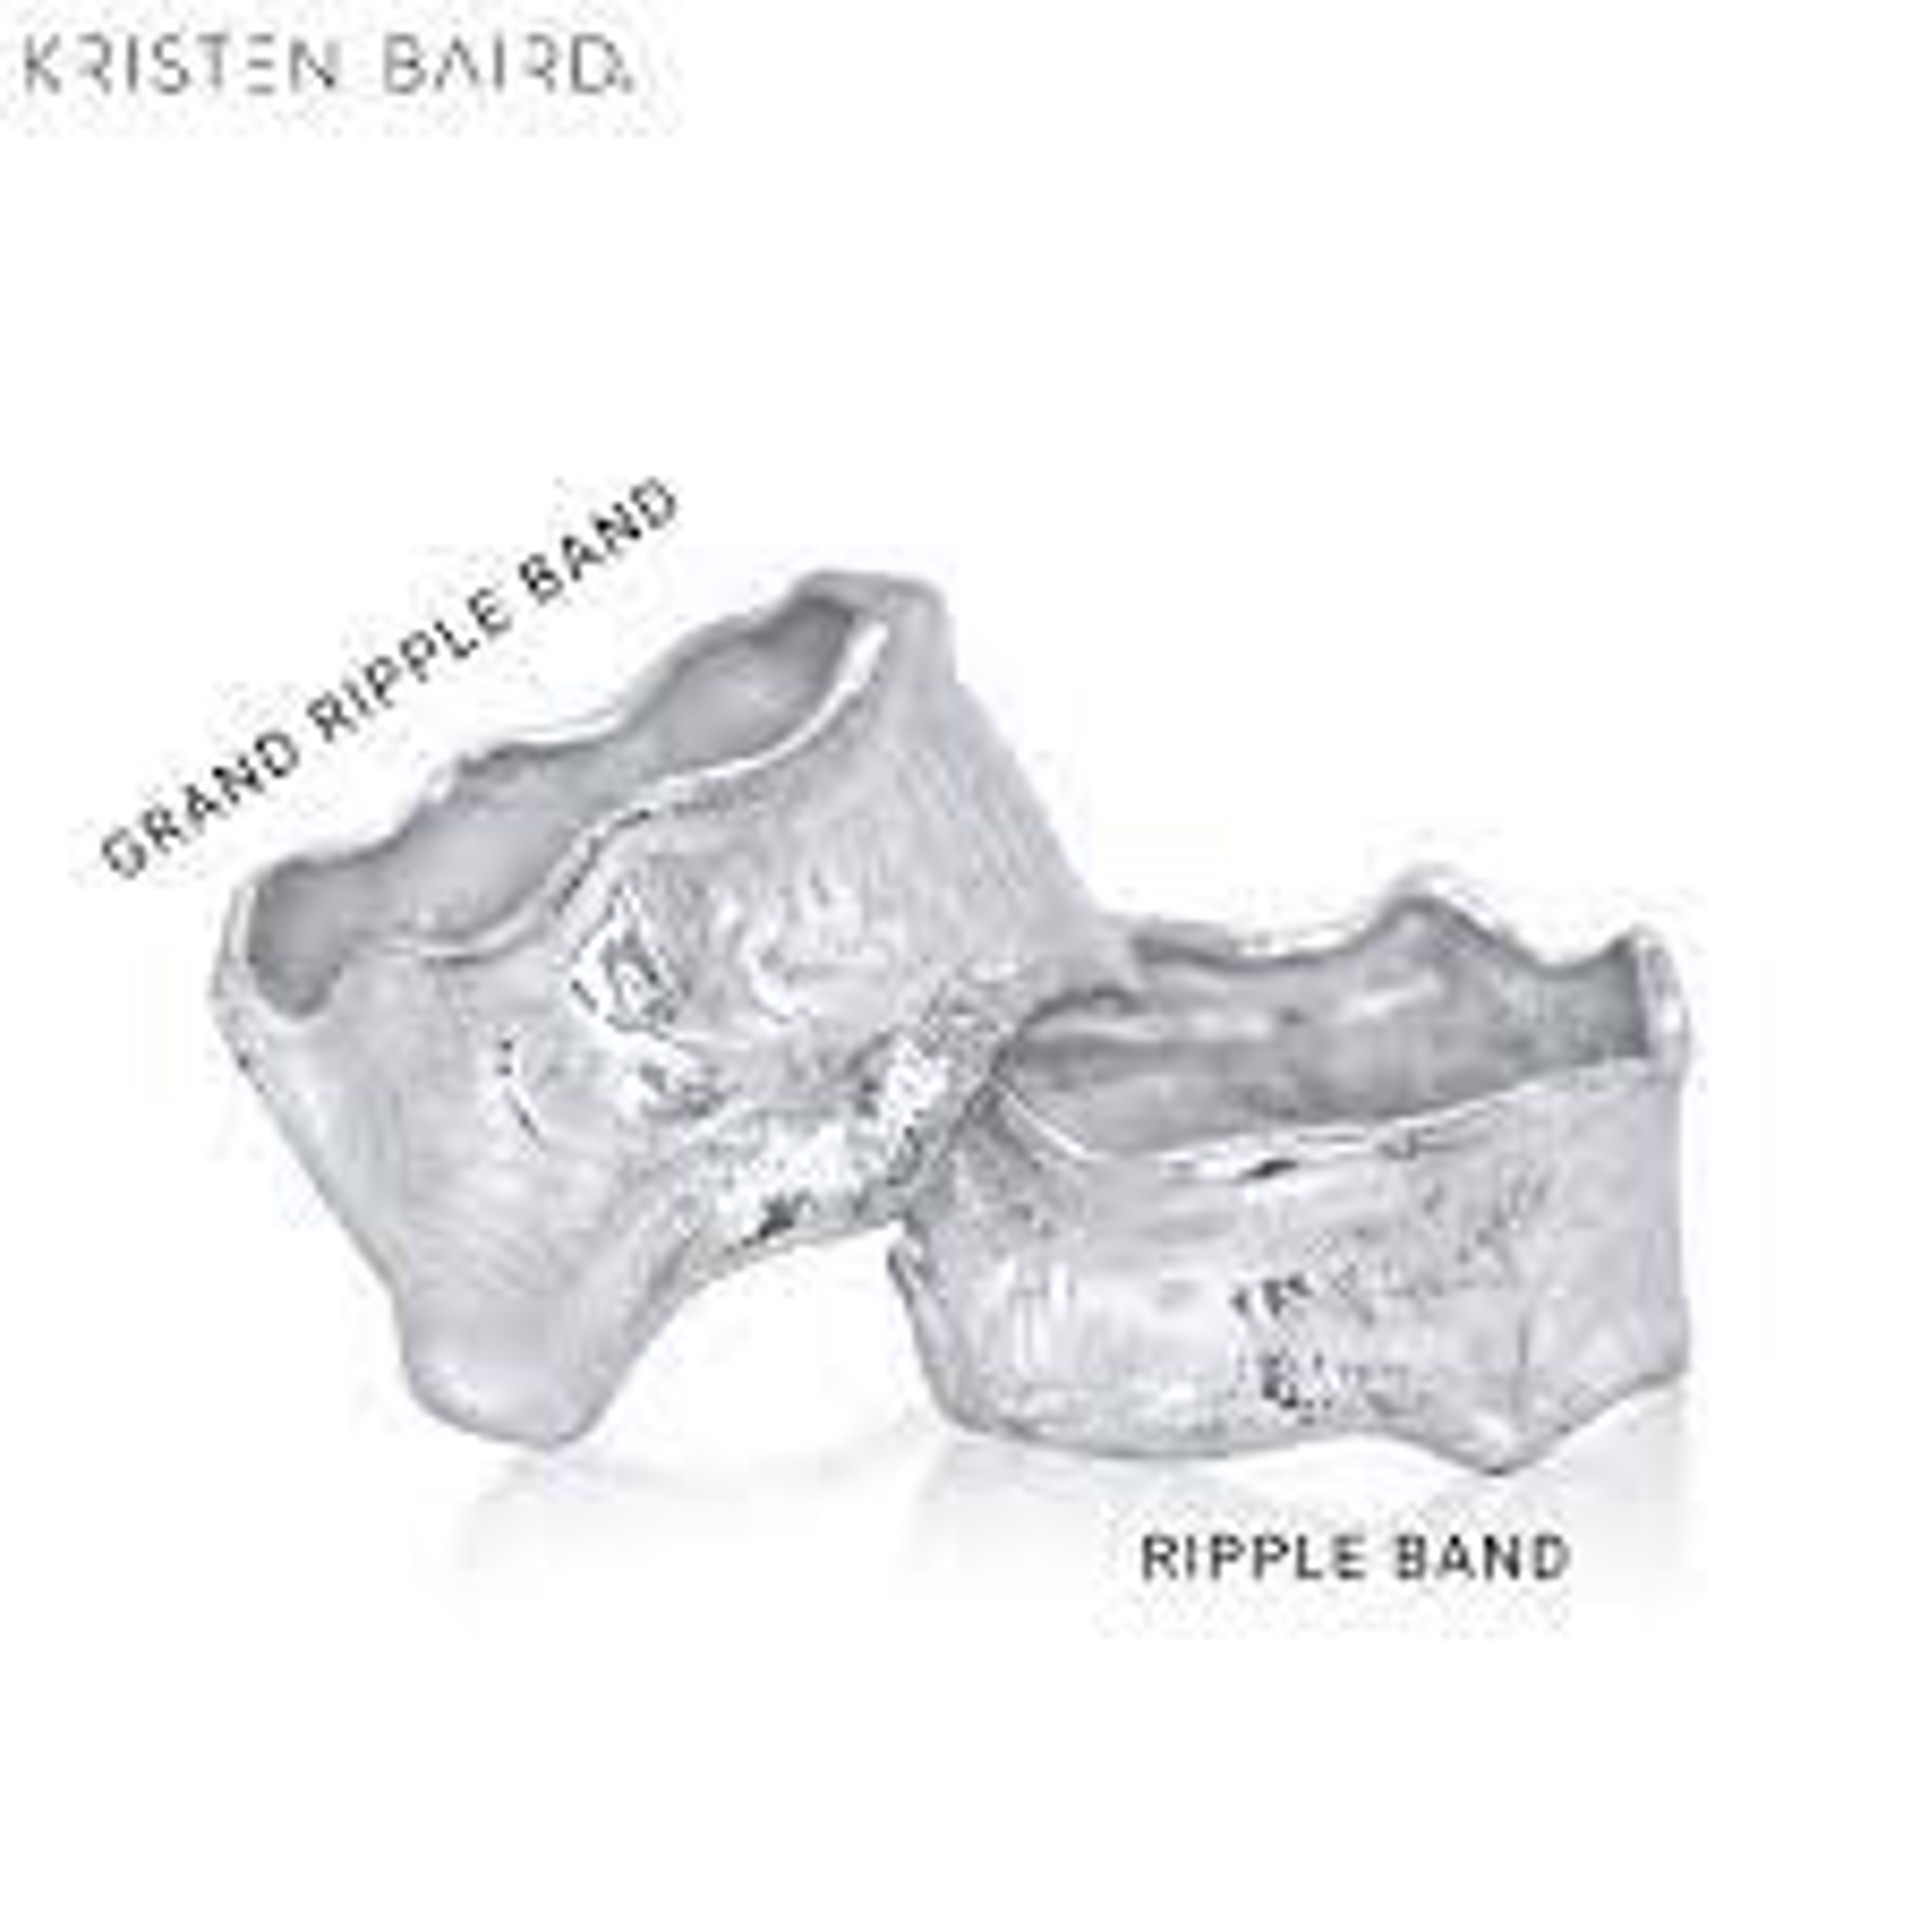 Thick Silver Band by Kristen Baird